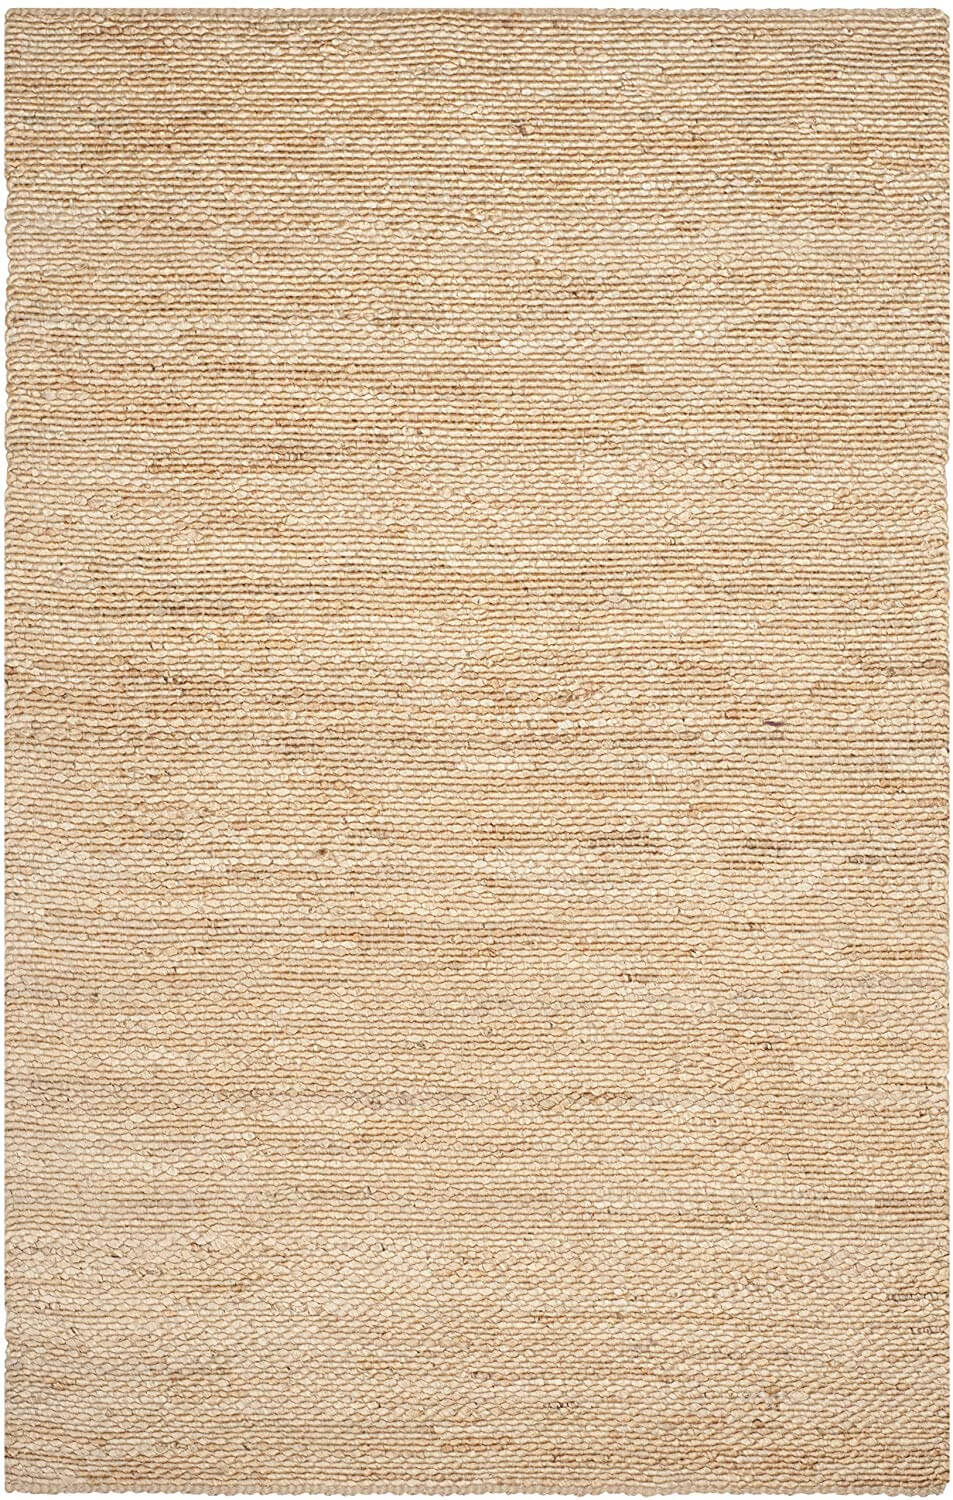 Hand Woven Natural Jute Area Rug 